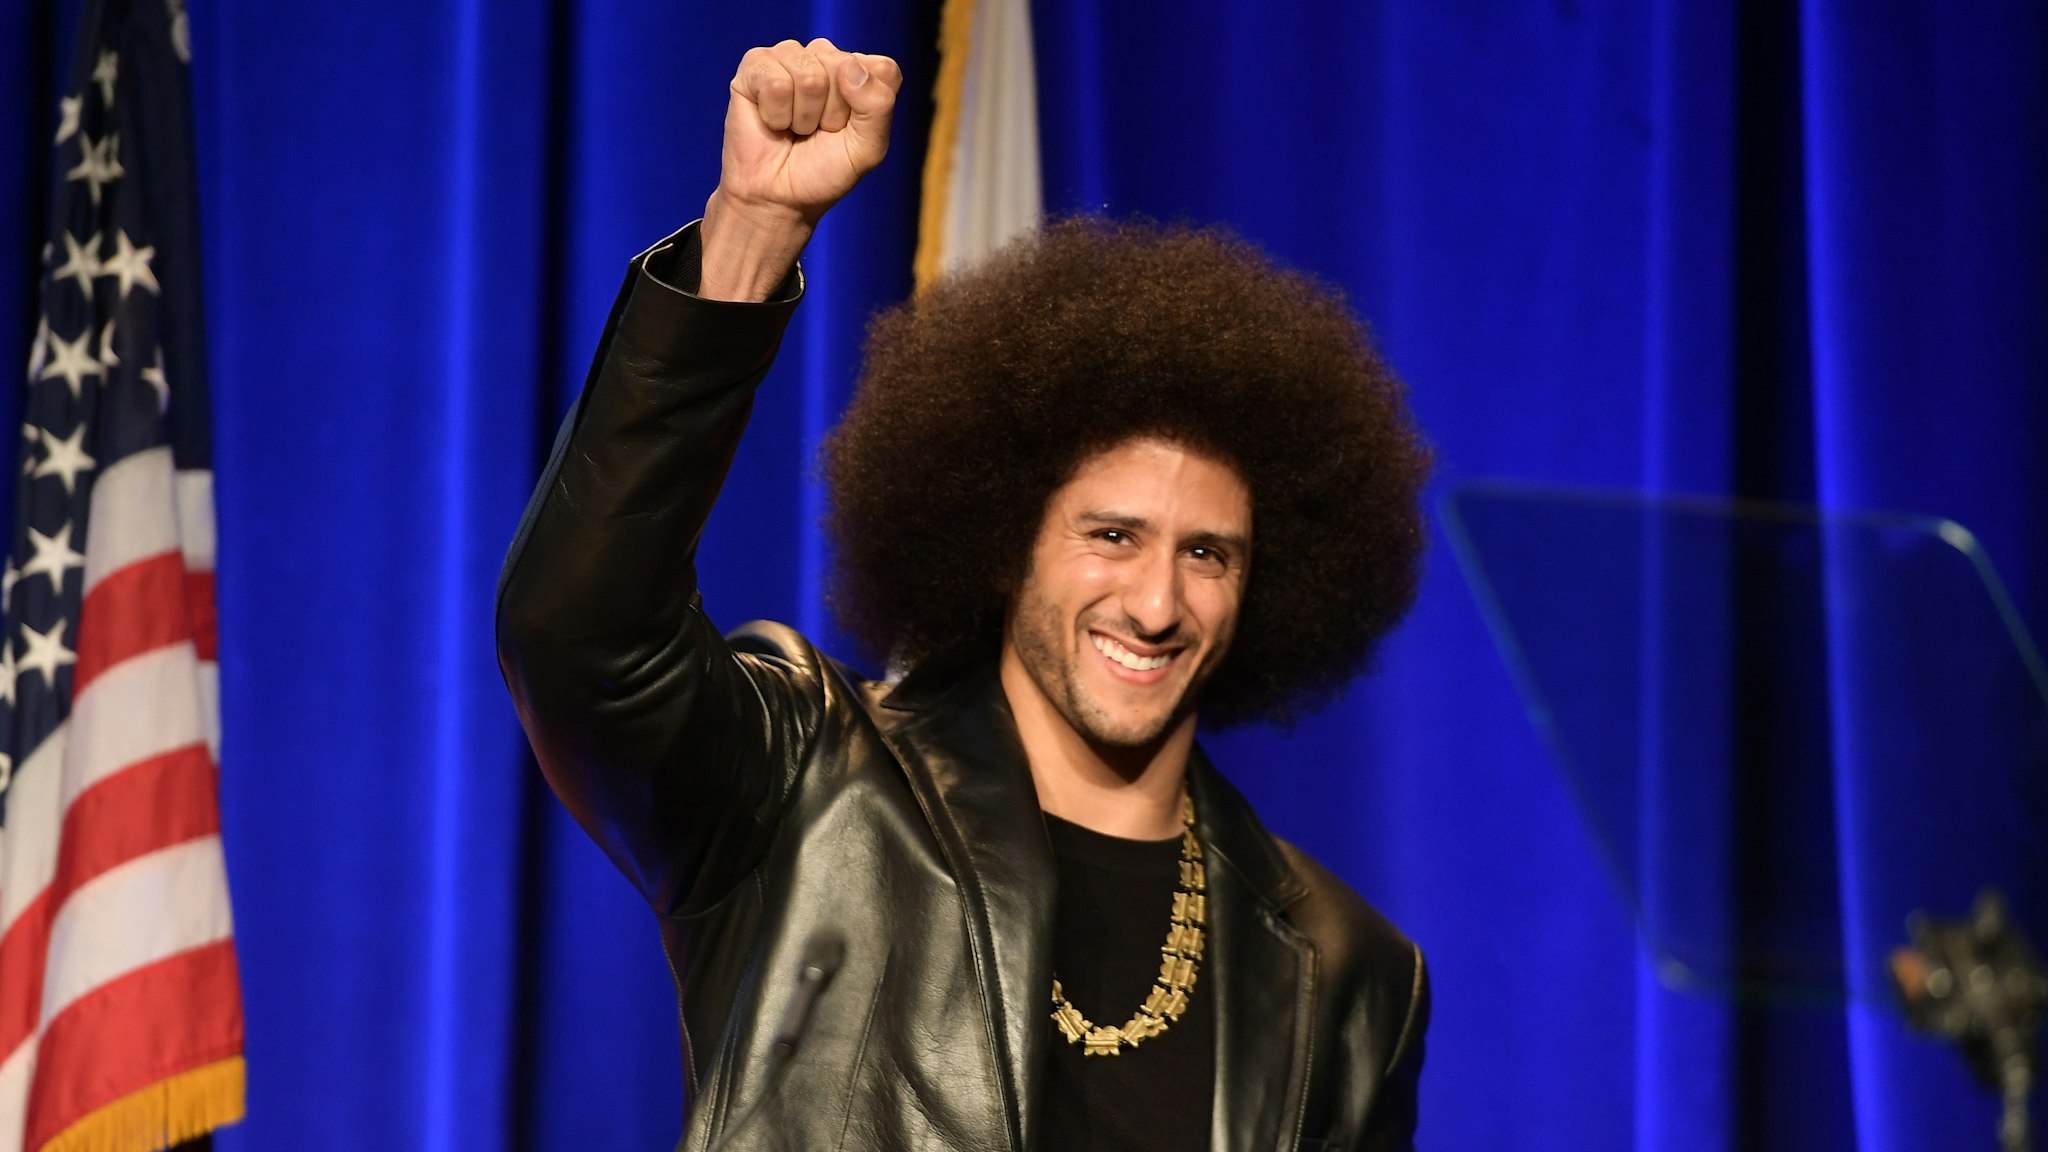 BEVERLY HILLS, CA - DECEMBER 03: Honoree Colin Kaepernick speaks onstage at ACLU SoCal Hosts Annual Bill of Rights Dinner at the Beverly Wilshire Four Seasons Hotel on December 3, 2017 in Beverly Hills, California.